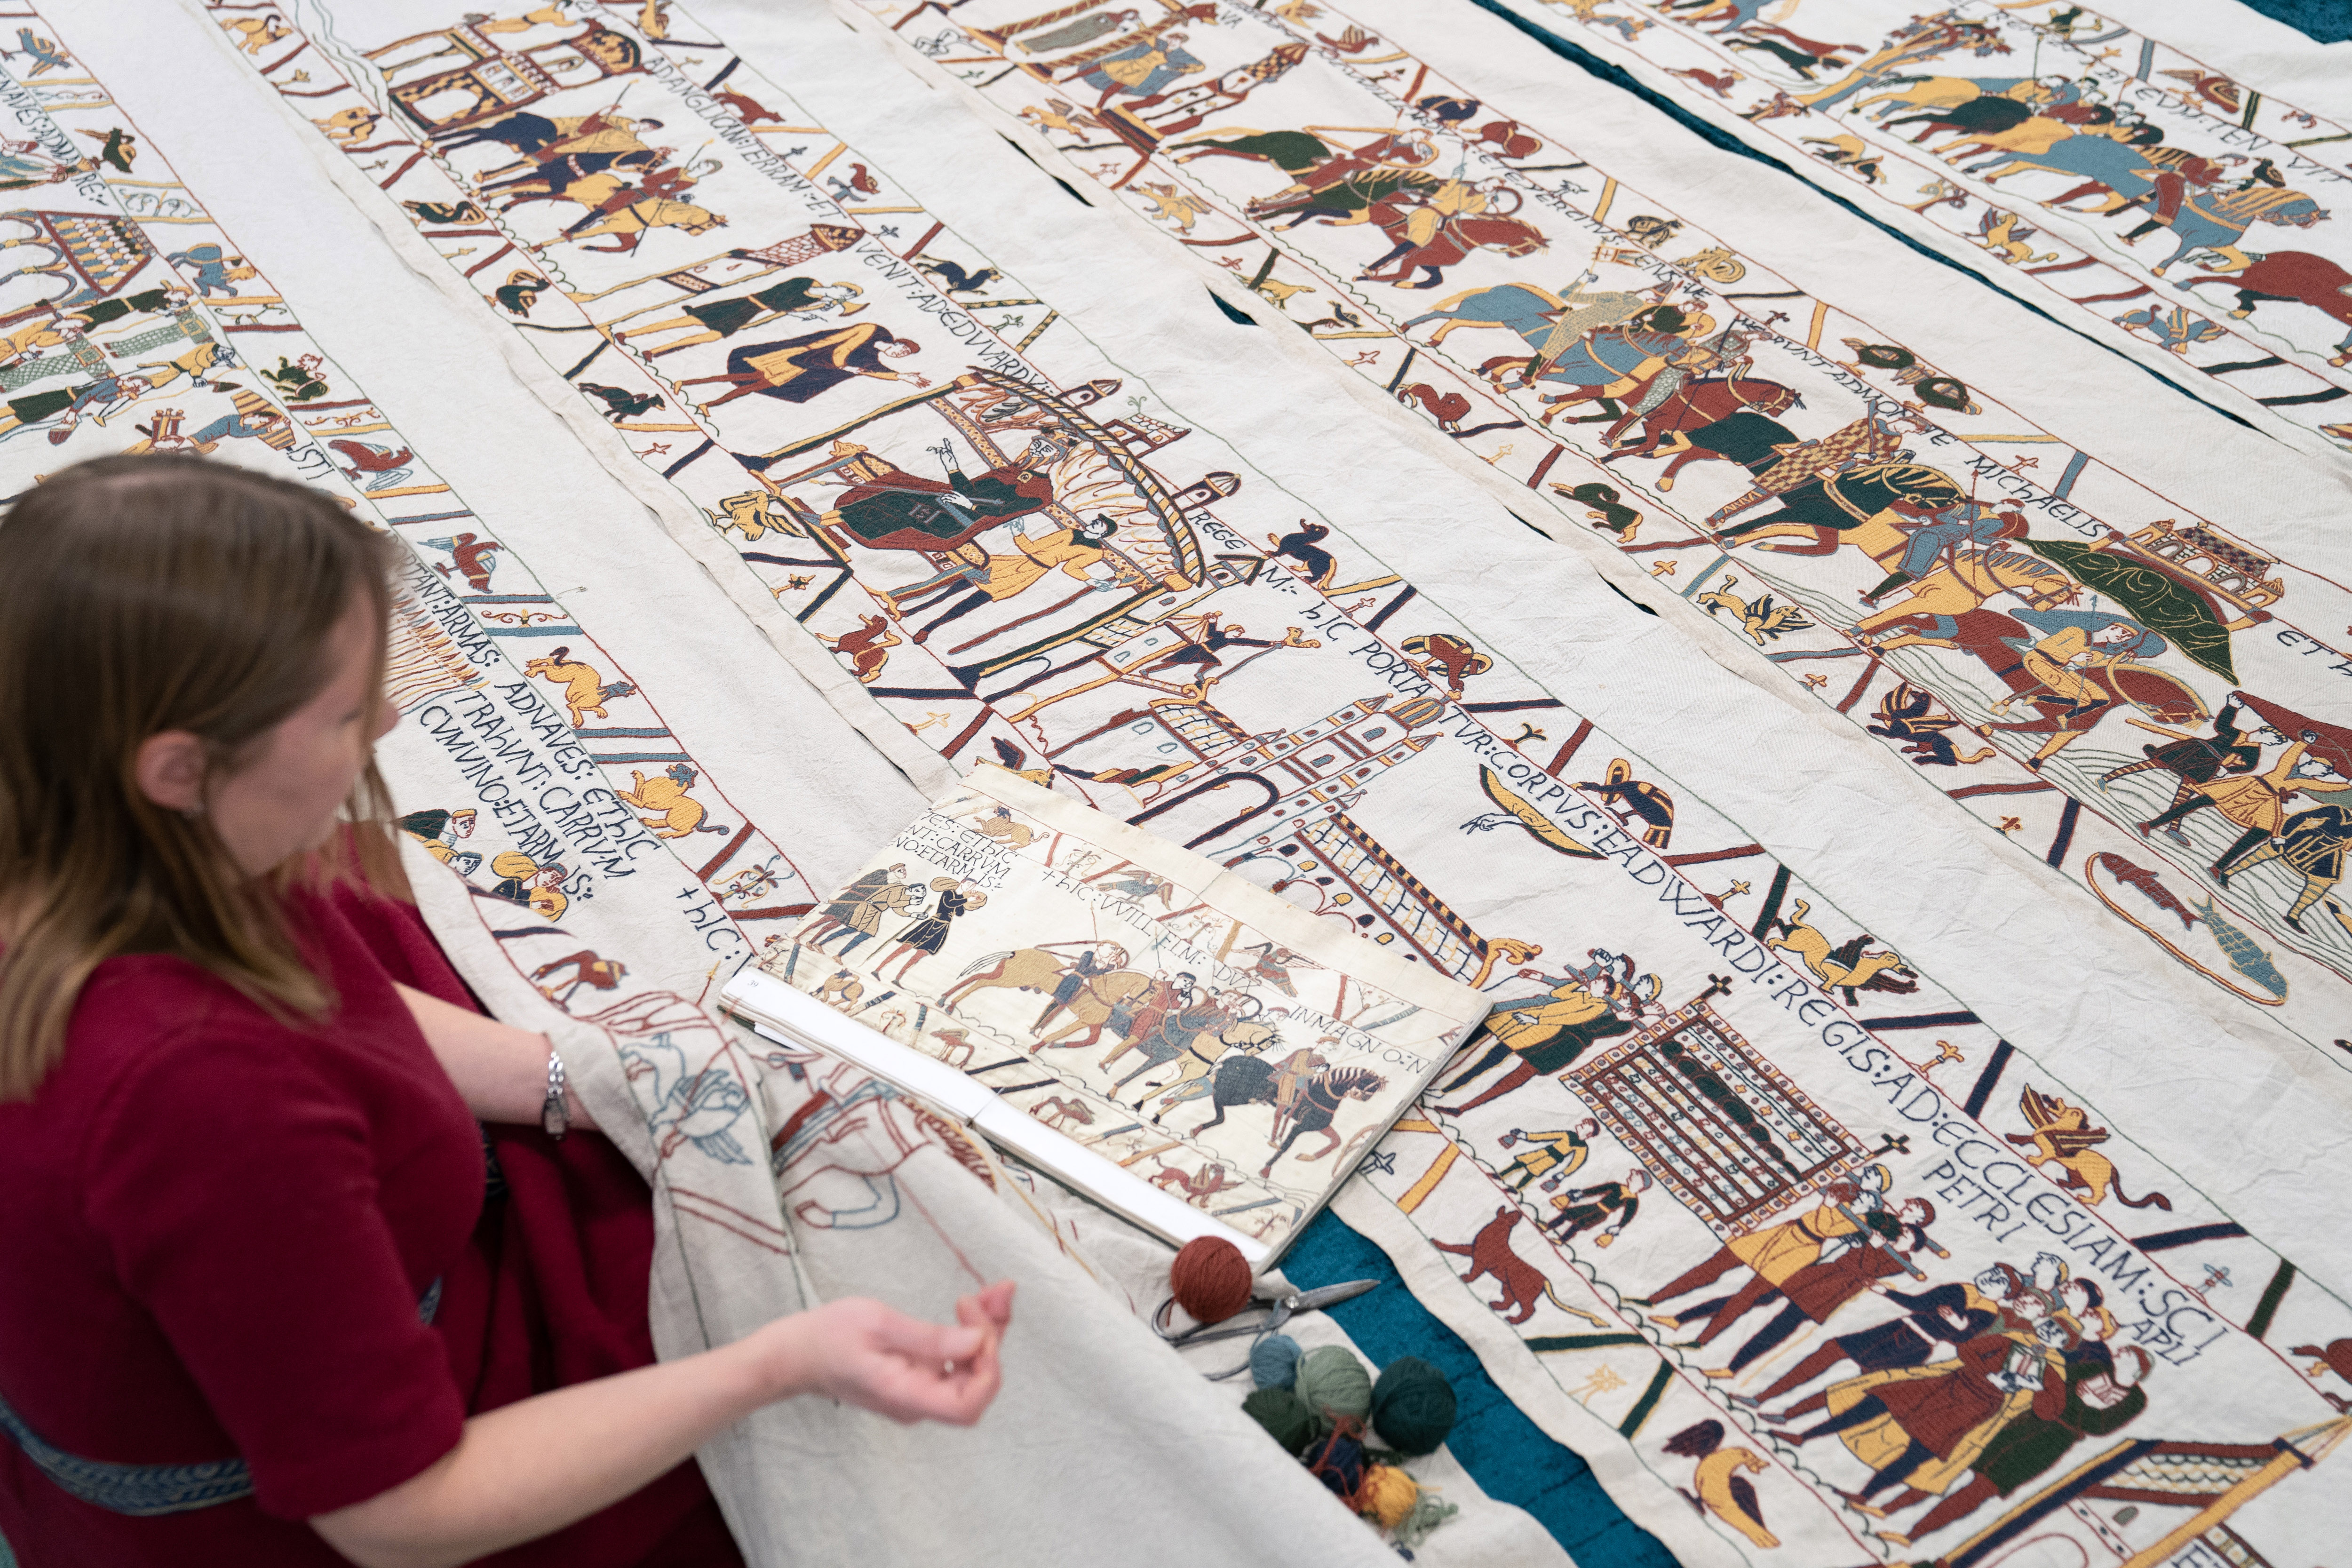 Miss Hansson said she has noticed mistakes in the original Bayeux Tapestry and copies them in her replica to 'honour what they've done'. (Joe Giddens/ PA)